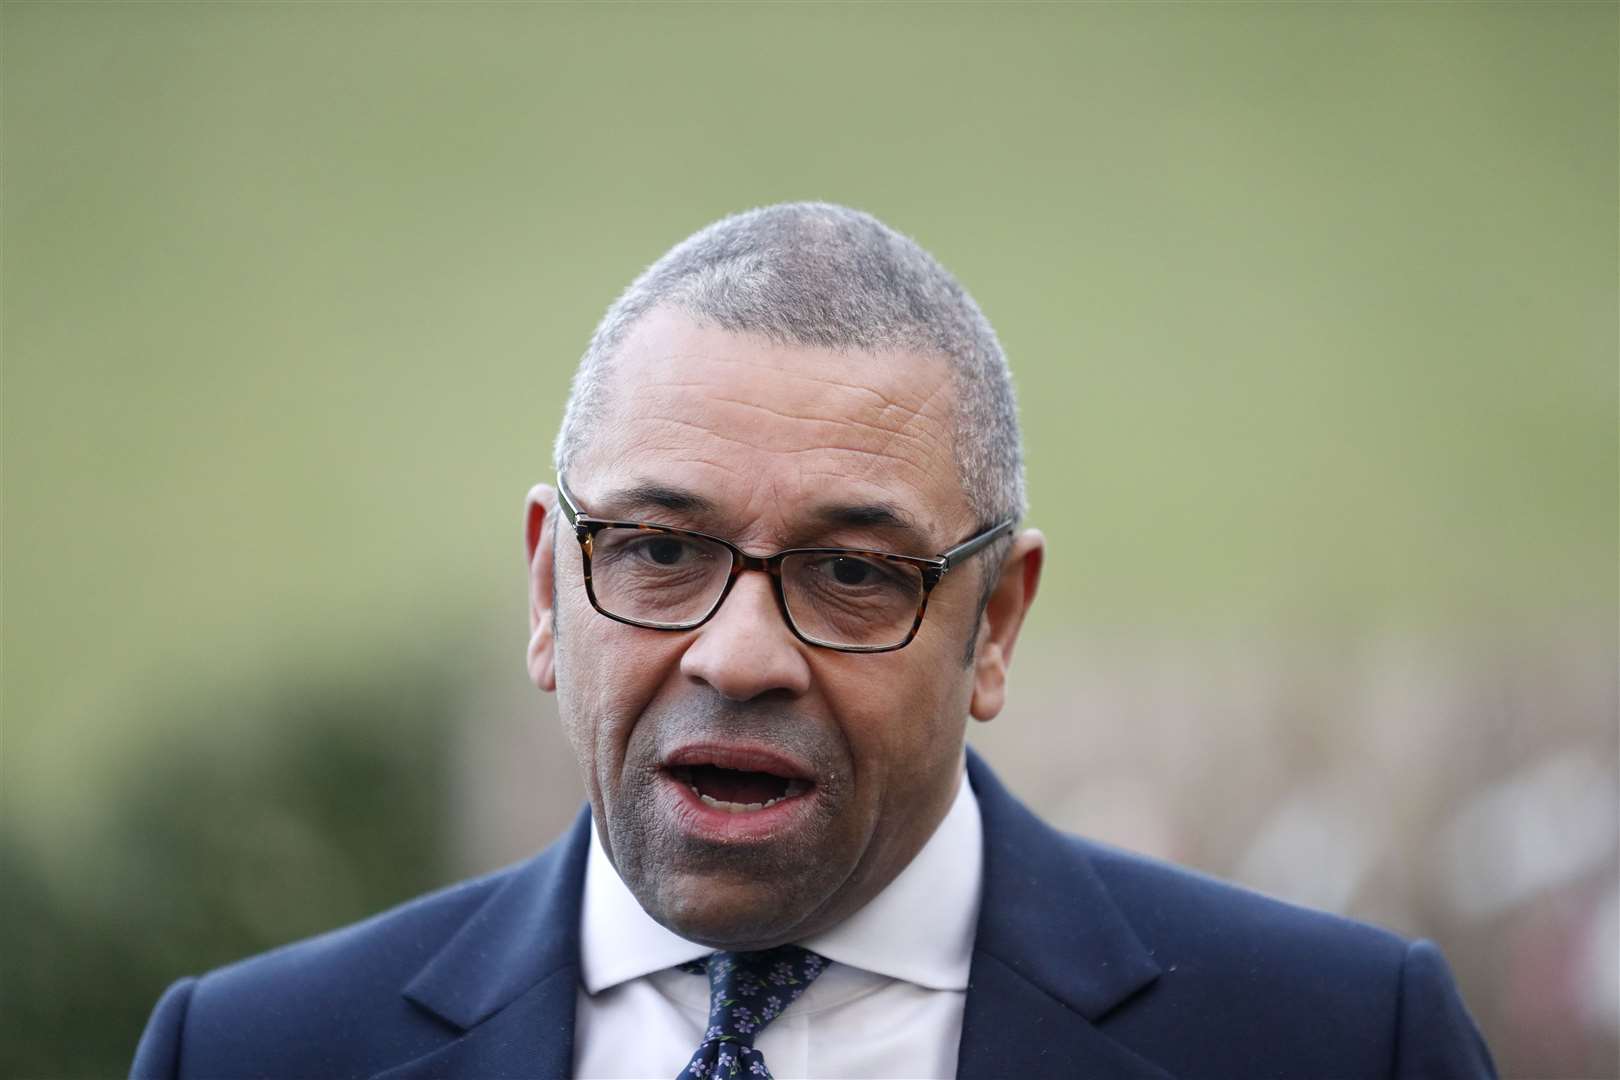 Foreign Secretary James Cleverly said the UK wanted to broker an agreement to ‘resolve all outstanding issues’ over the Indian Ocean archipelago (Peter Morrison/PA)